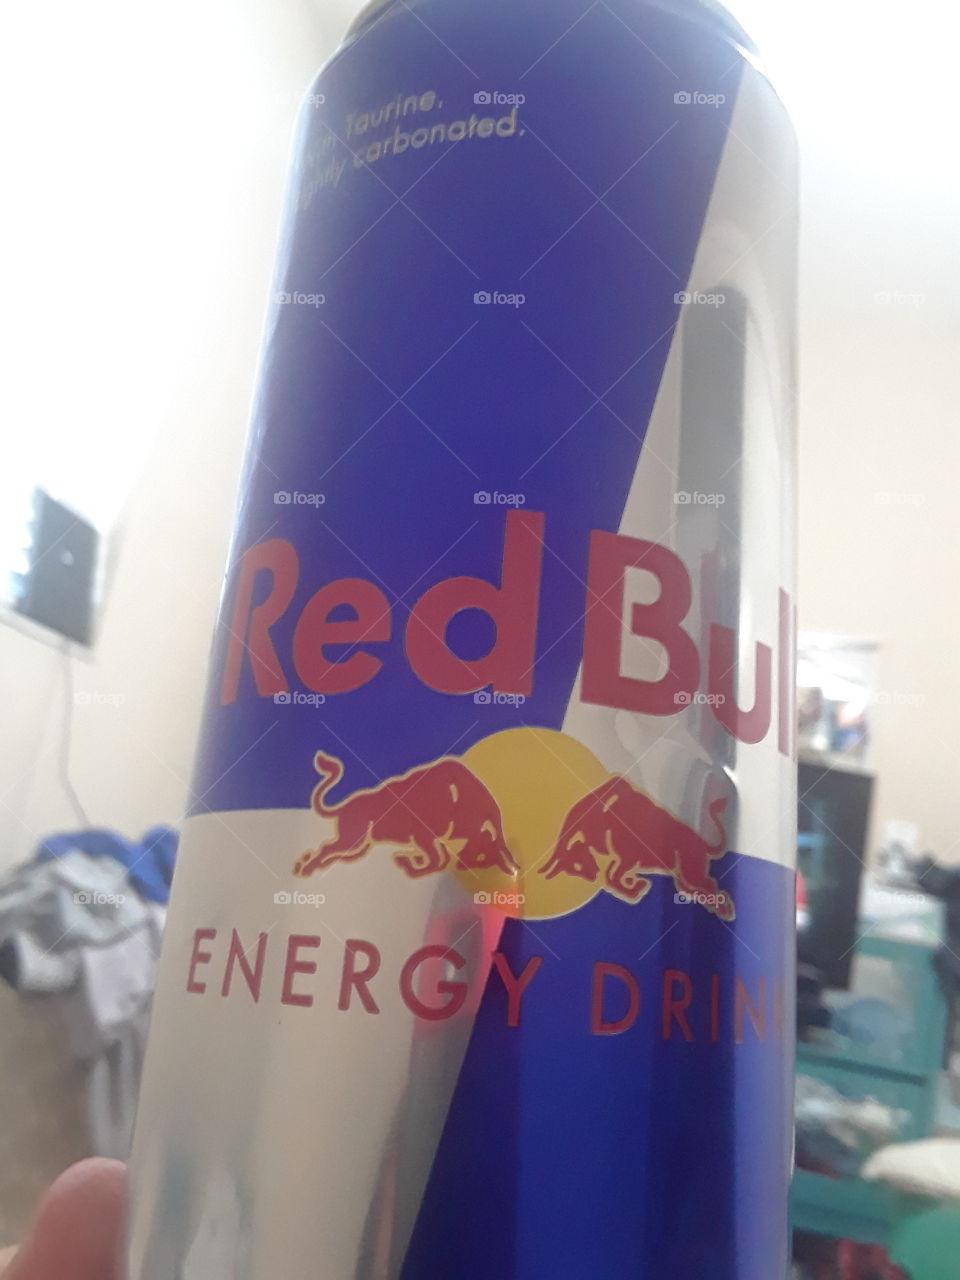 red bull gives you wings.It will make u fly.Taurine.electricity.Energy.Competition.Passion.Red bull makes you go.Get in the air when you drink red bull.Feel the bull.